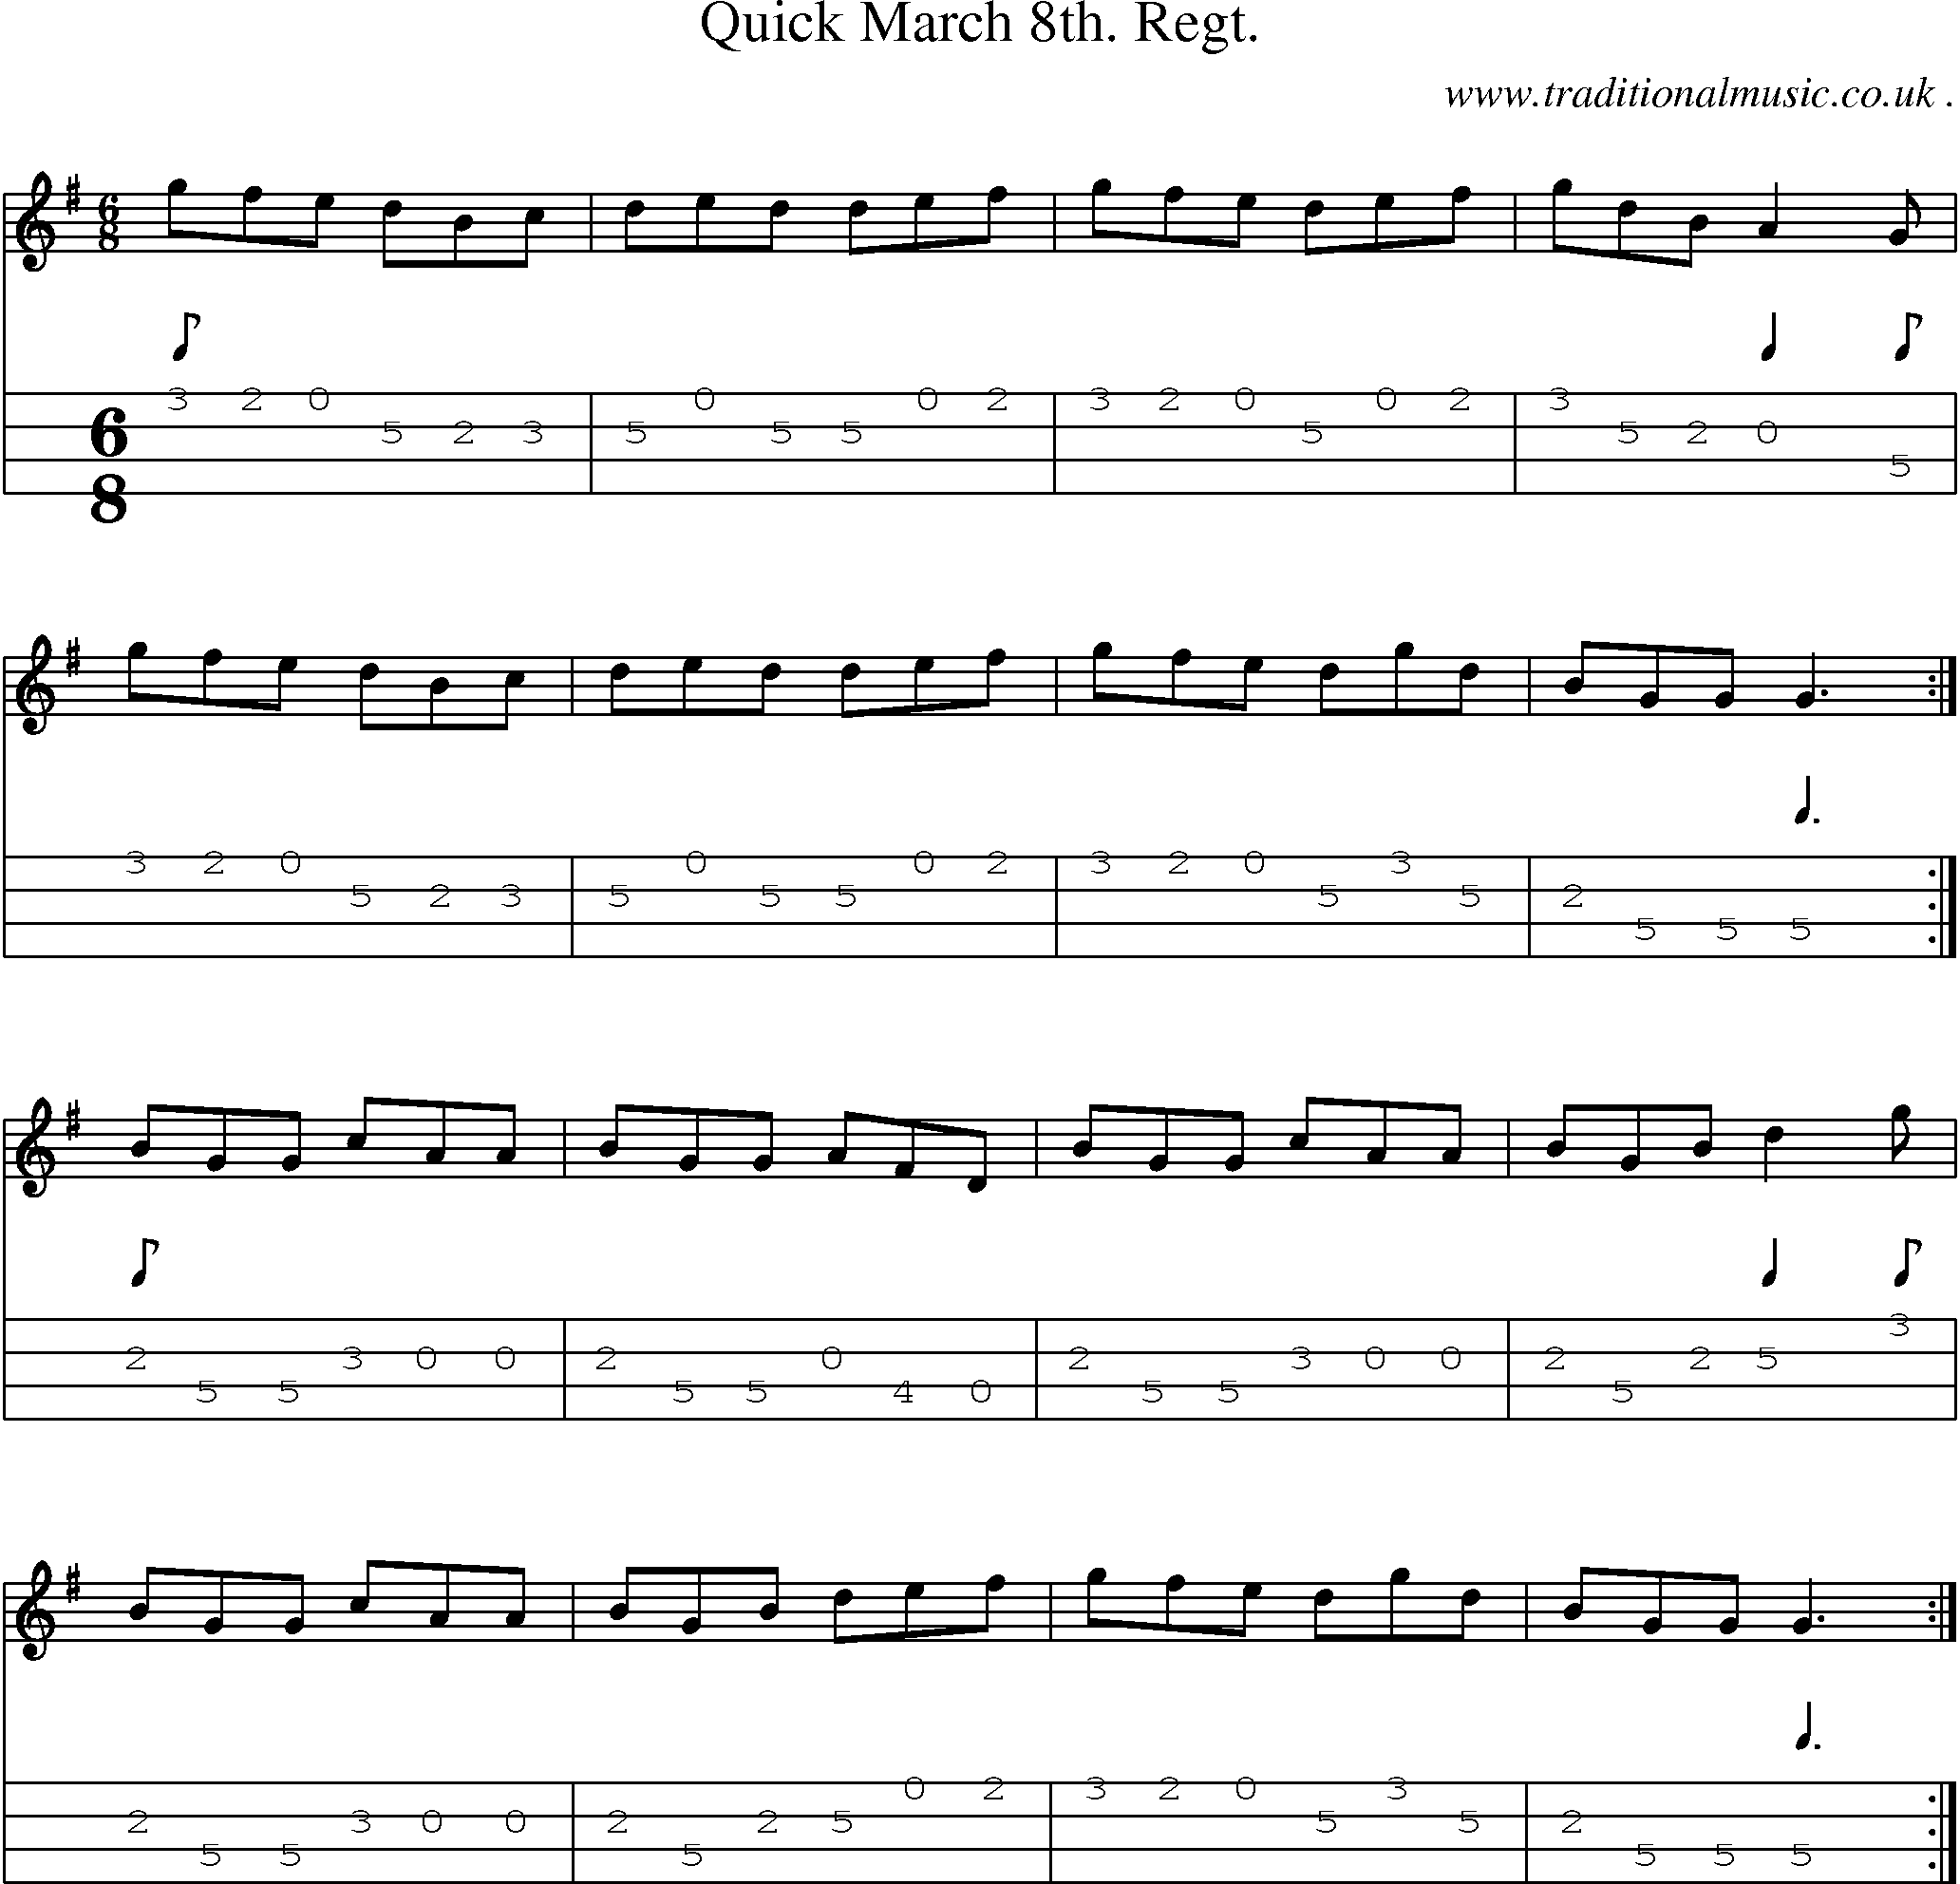 Sheet-music  score, Chords and Mandolin Tabs for Quick March 8th Regt